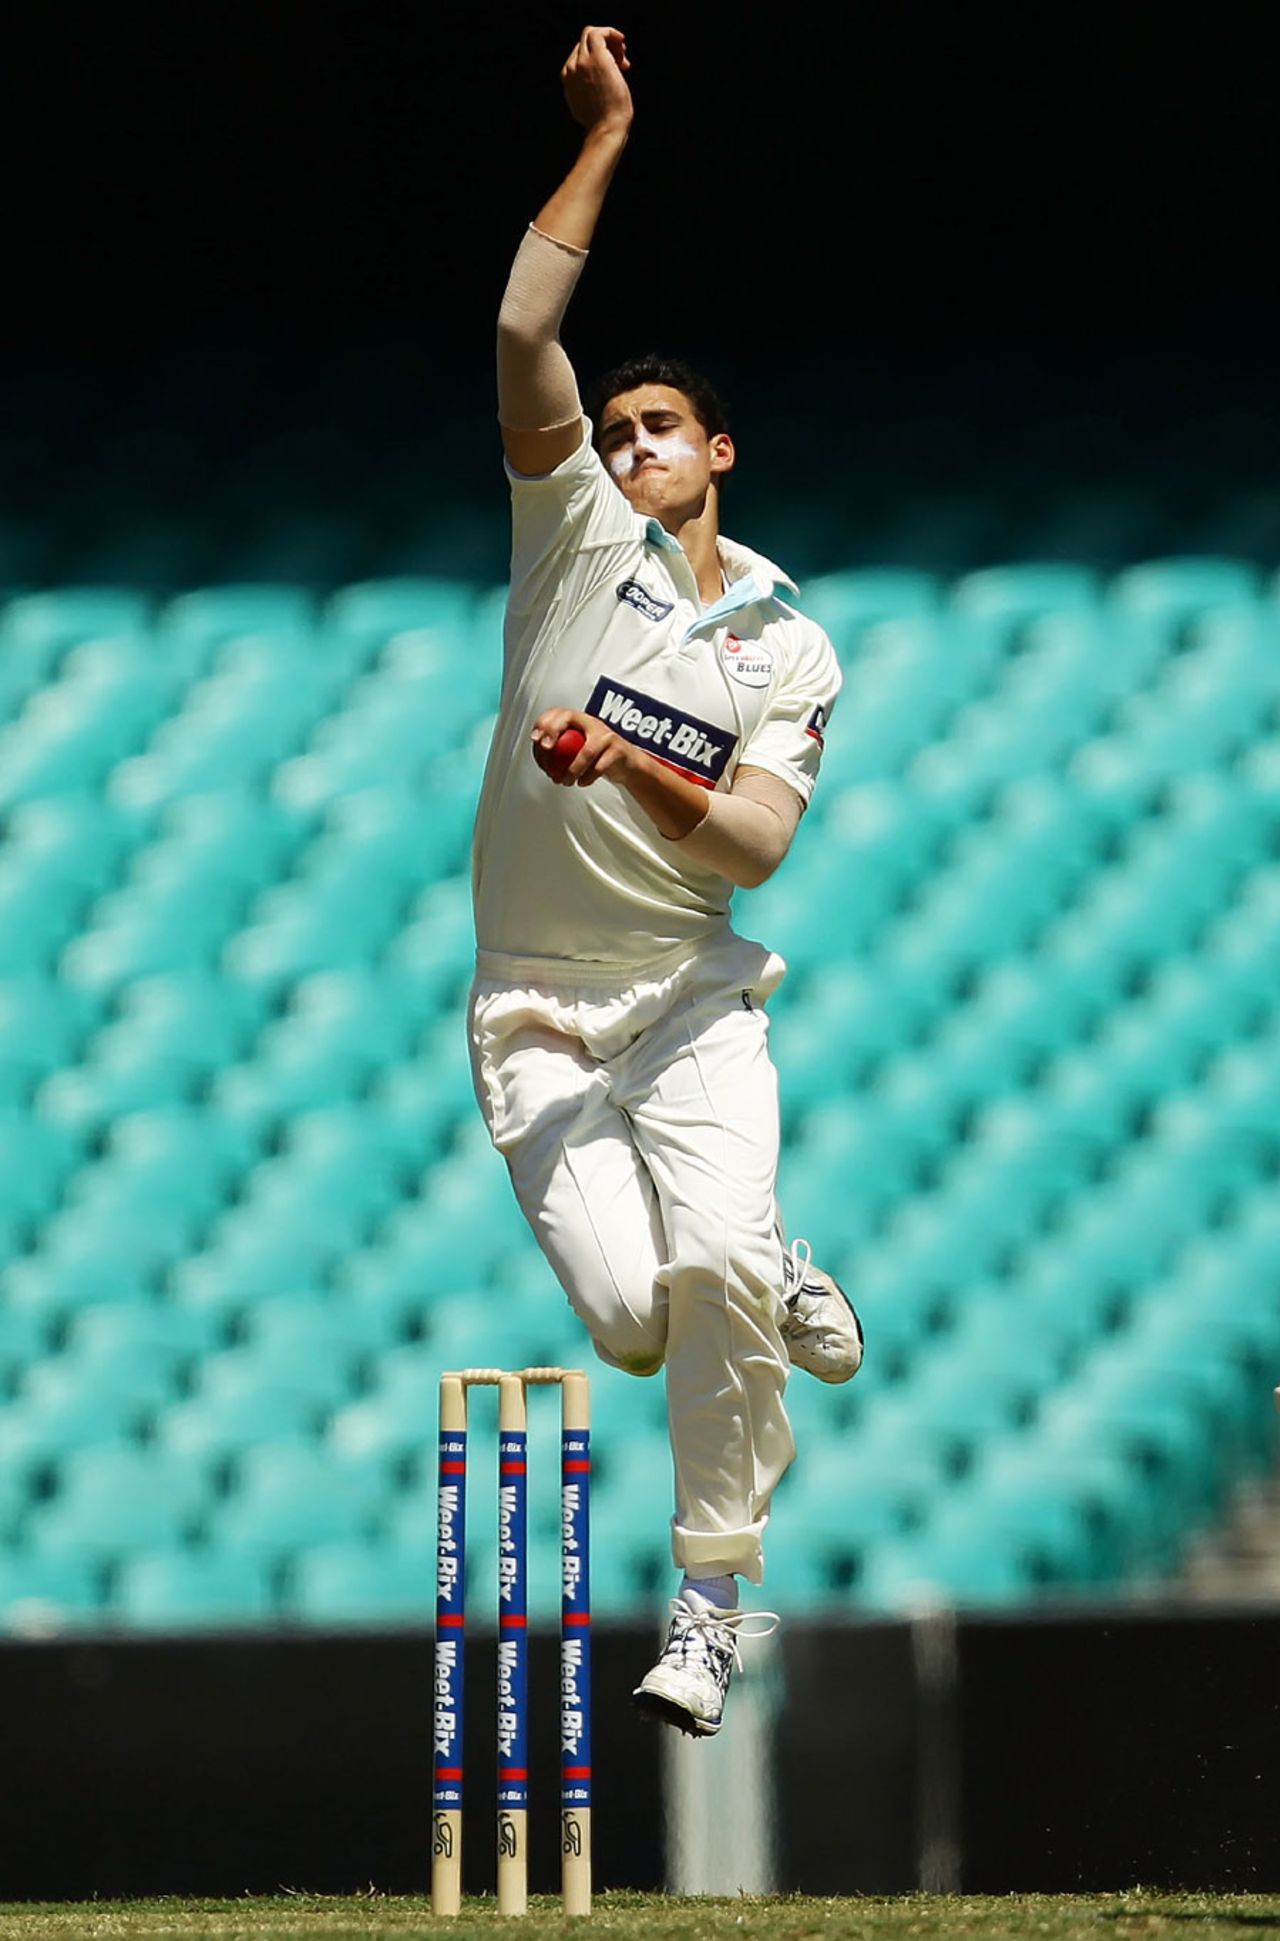 Mitchell Starc in his delivery stride, New South Wales v Victoria, Sydney, 1st day